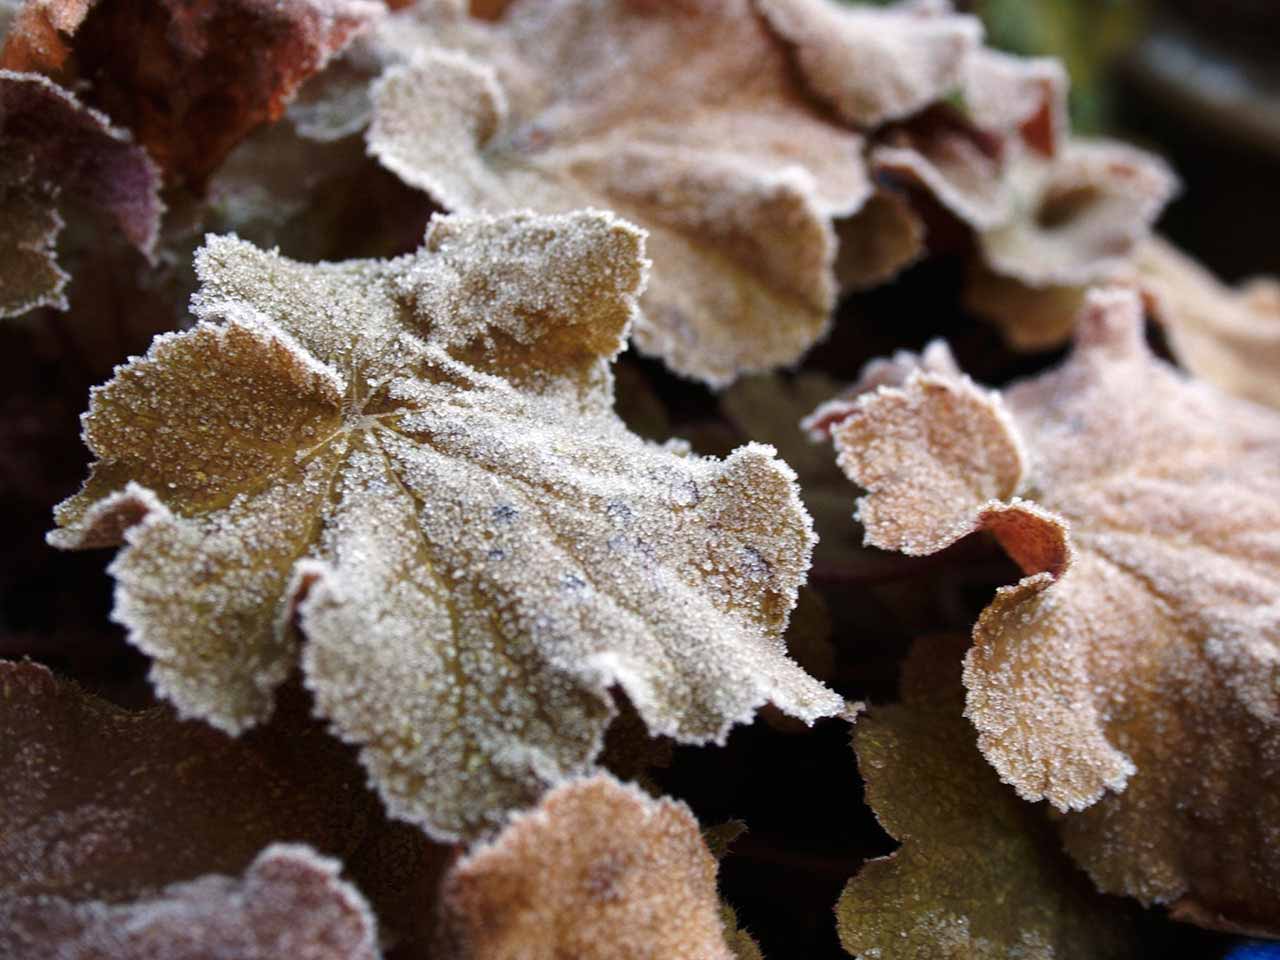 Heuchera plant with frosty leaves in the winter